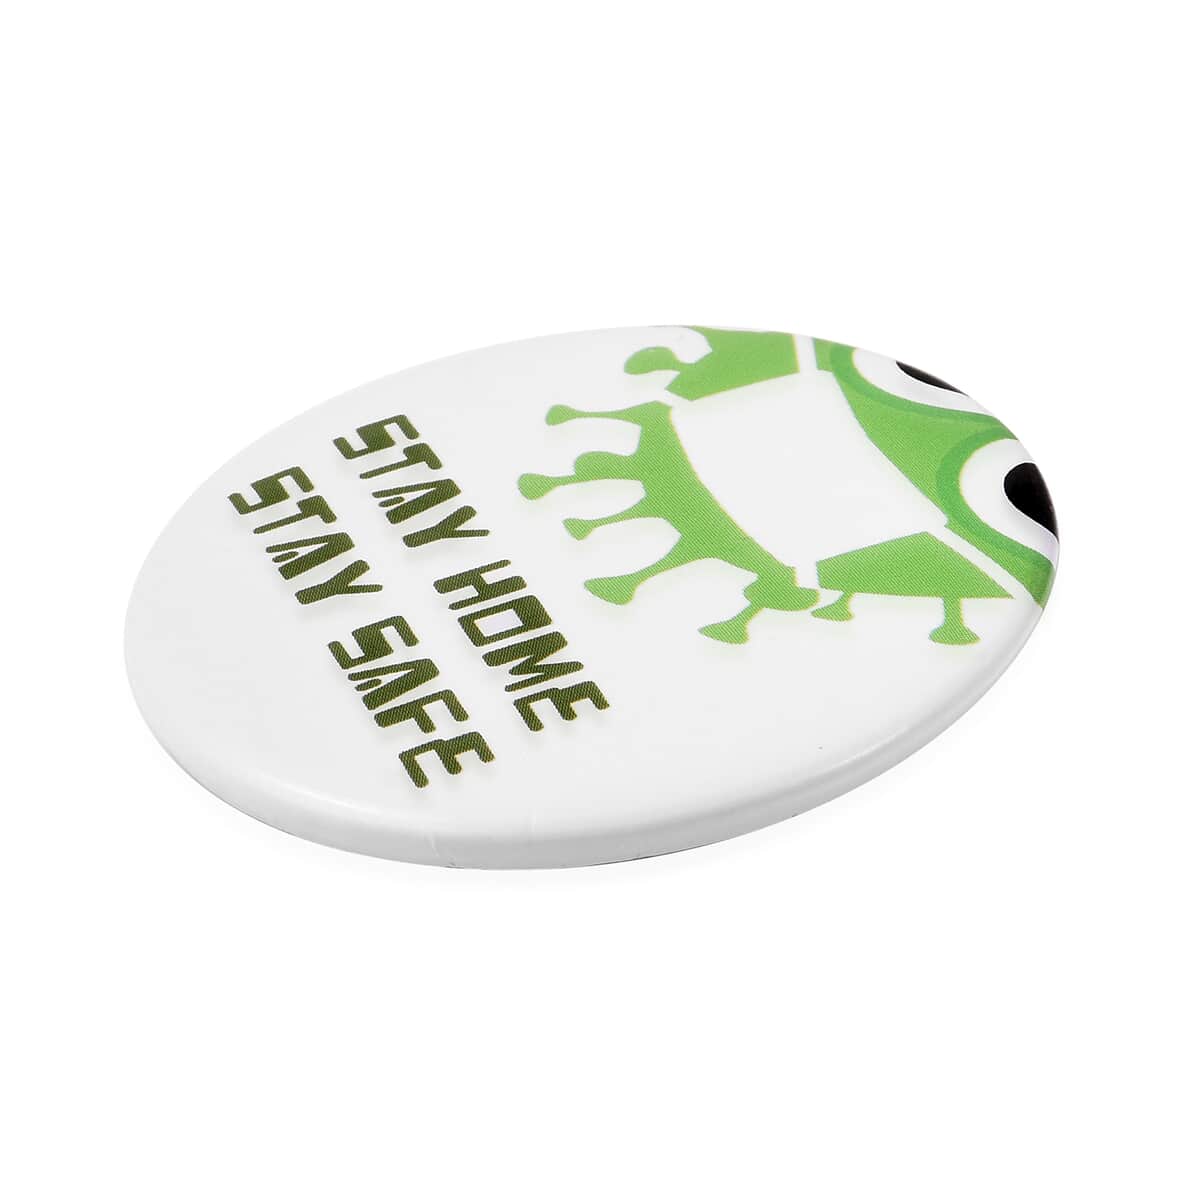 Stay Home Stay Safe Green Button Pin image number 2